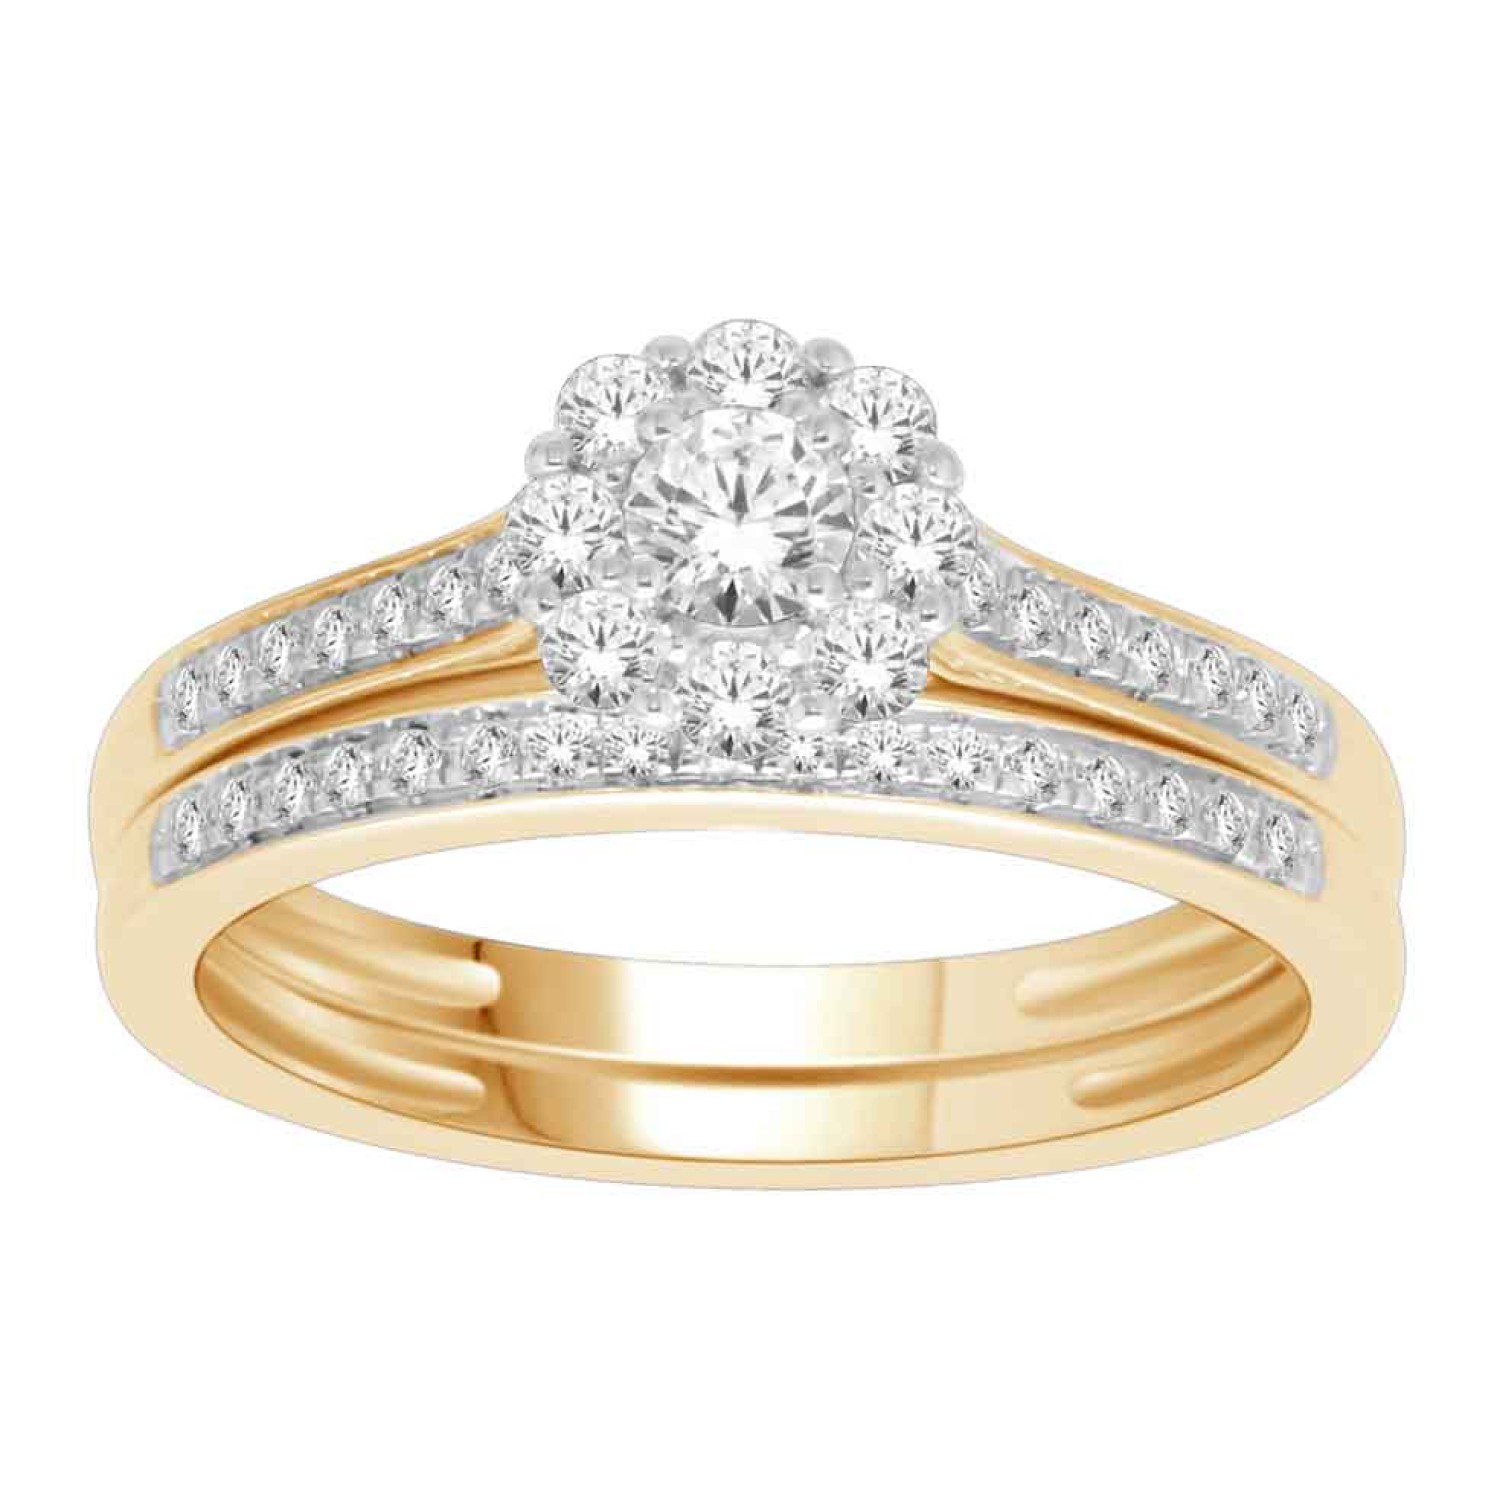 9ct Diamond Engagement Ring 0.50ct TDW. A 9ct Diamond Engagement Ring  with a total of 0.50ct in Diamonds 5 Year Written Guarantee 3 Months No Payments and Interest for Q Card holders LAYBUY - Pay it easy, in 6 weekly payments and have it now. O @christie